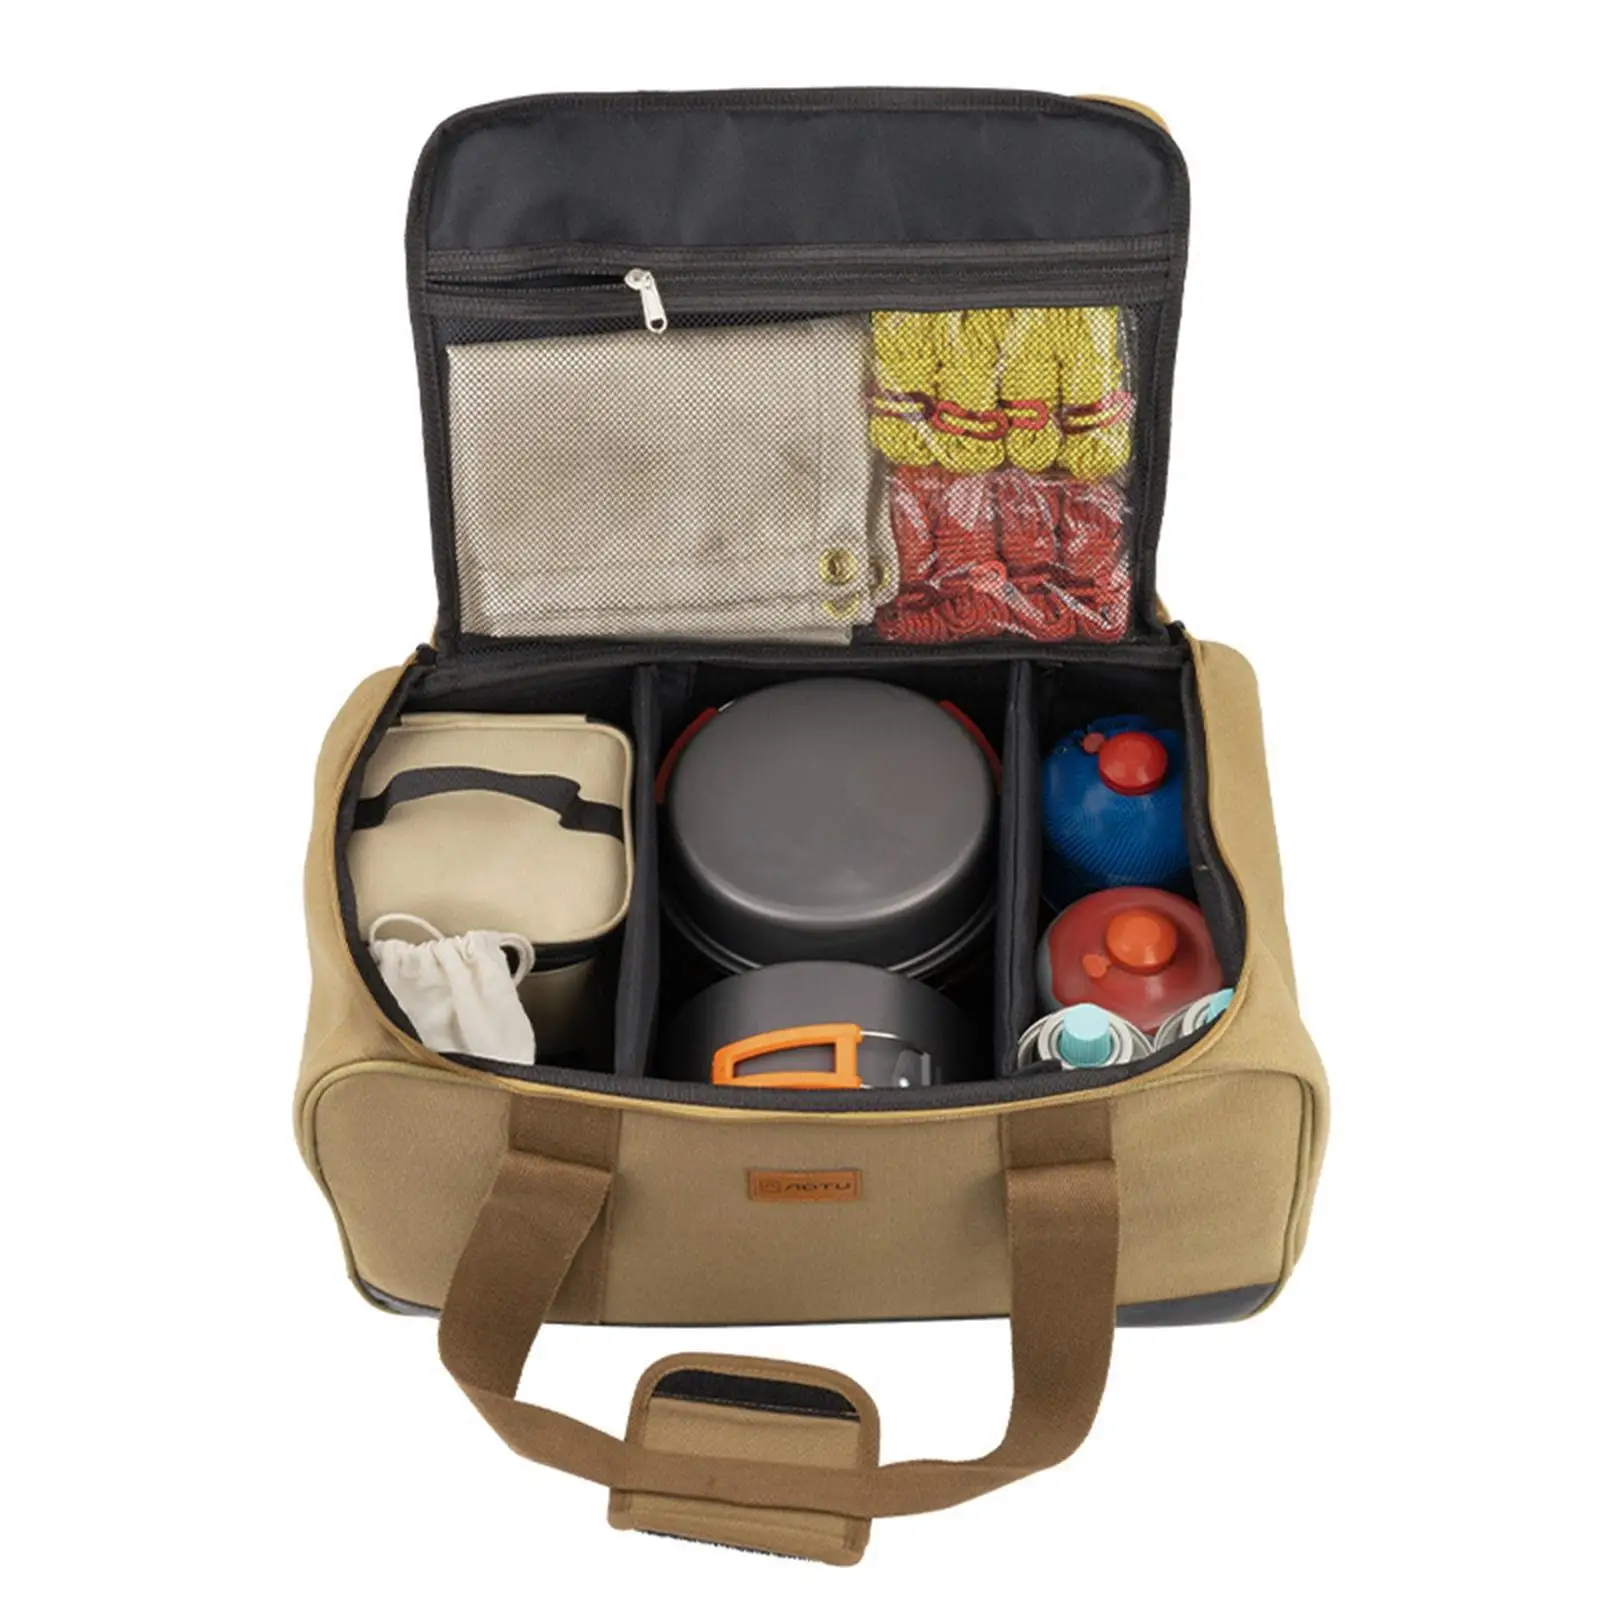 Portable BBQ Tableware Carry Bag Camping Accessories Tool Bag Camping Cooking Utensils Organizer for Outdoor